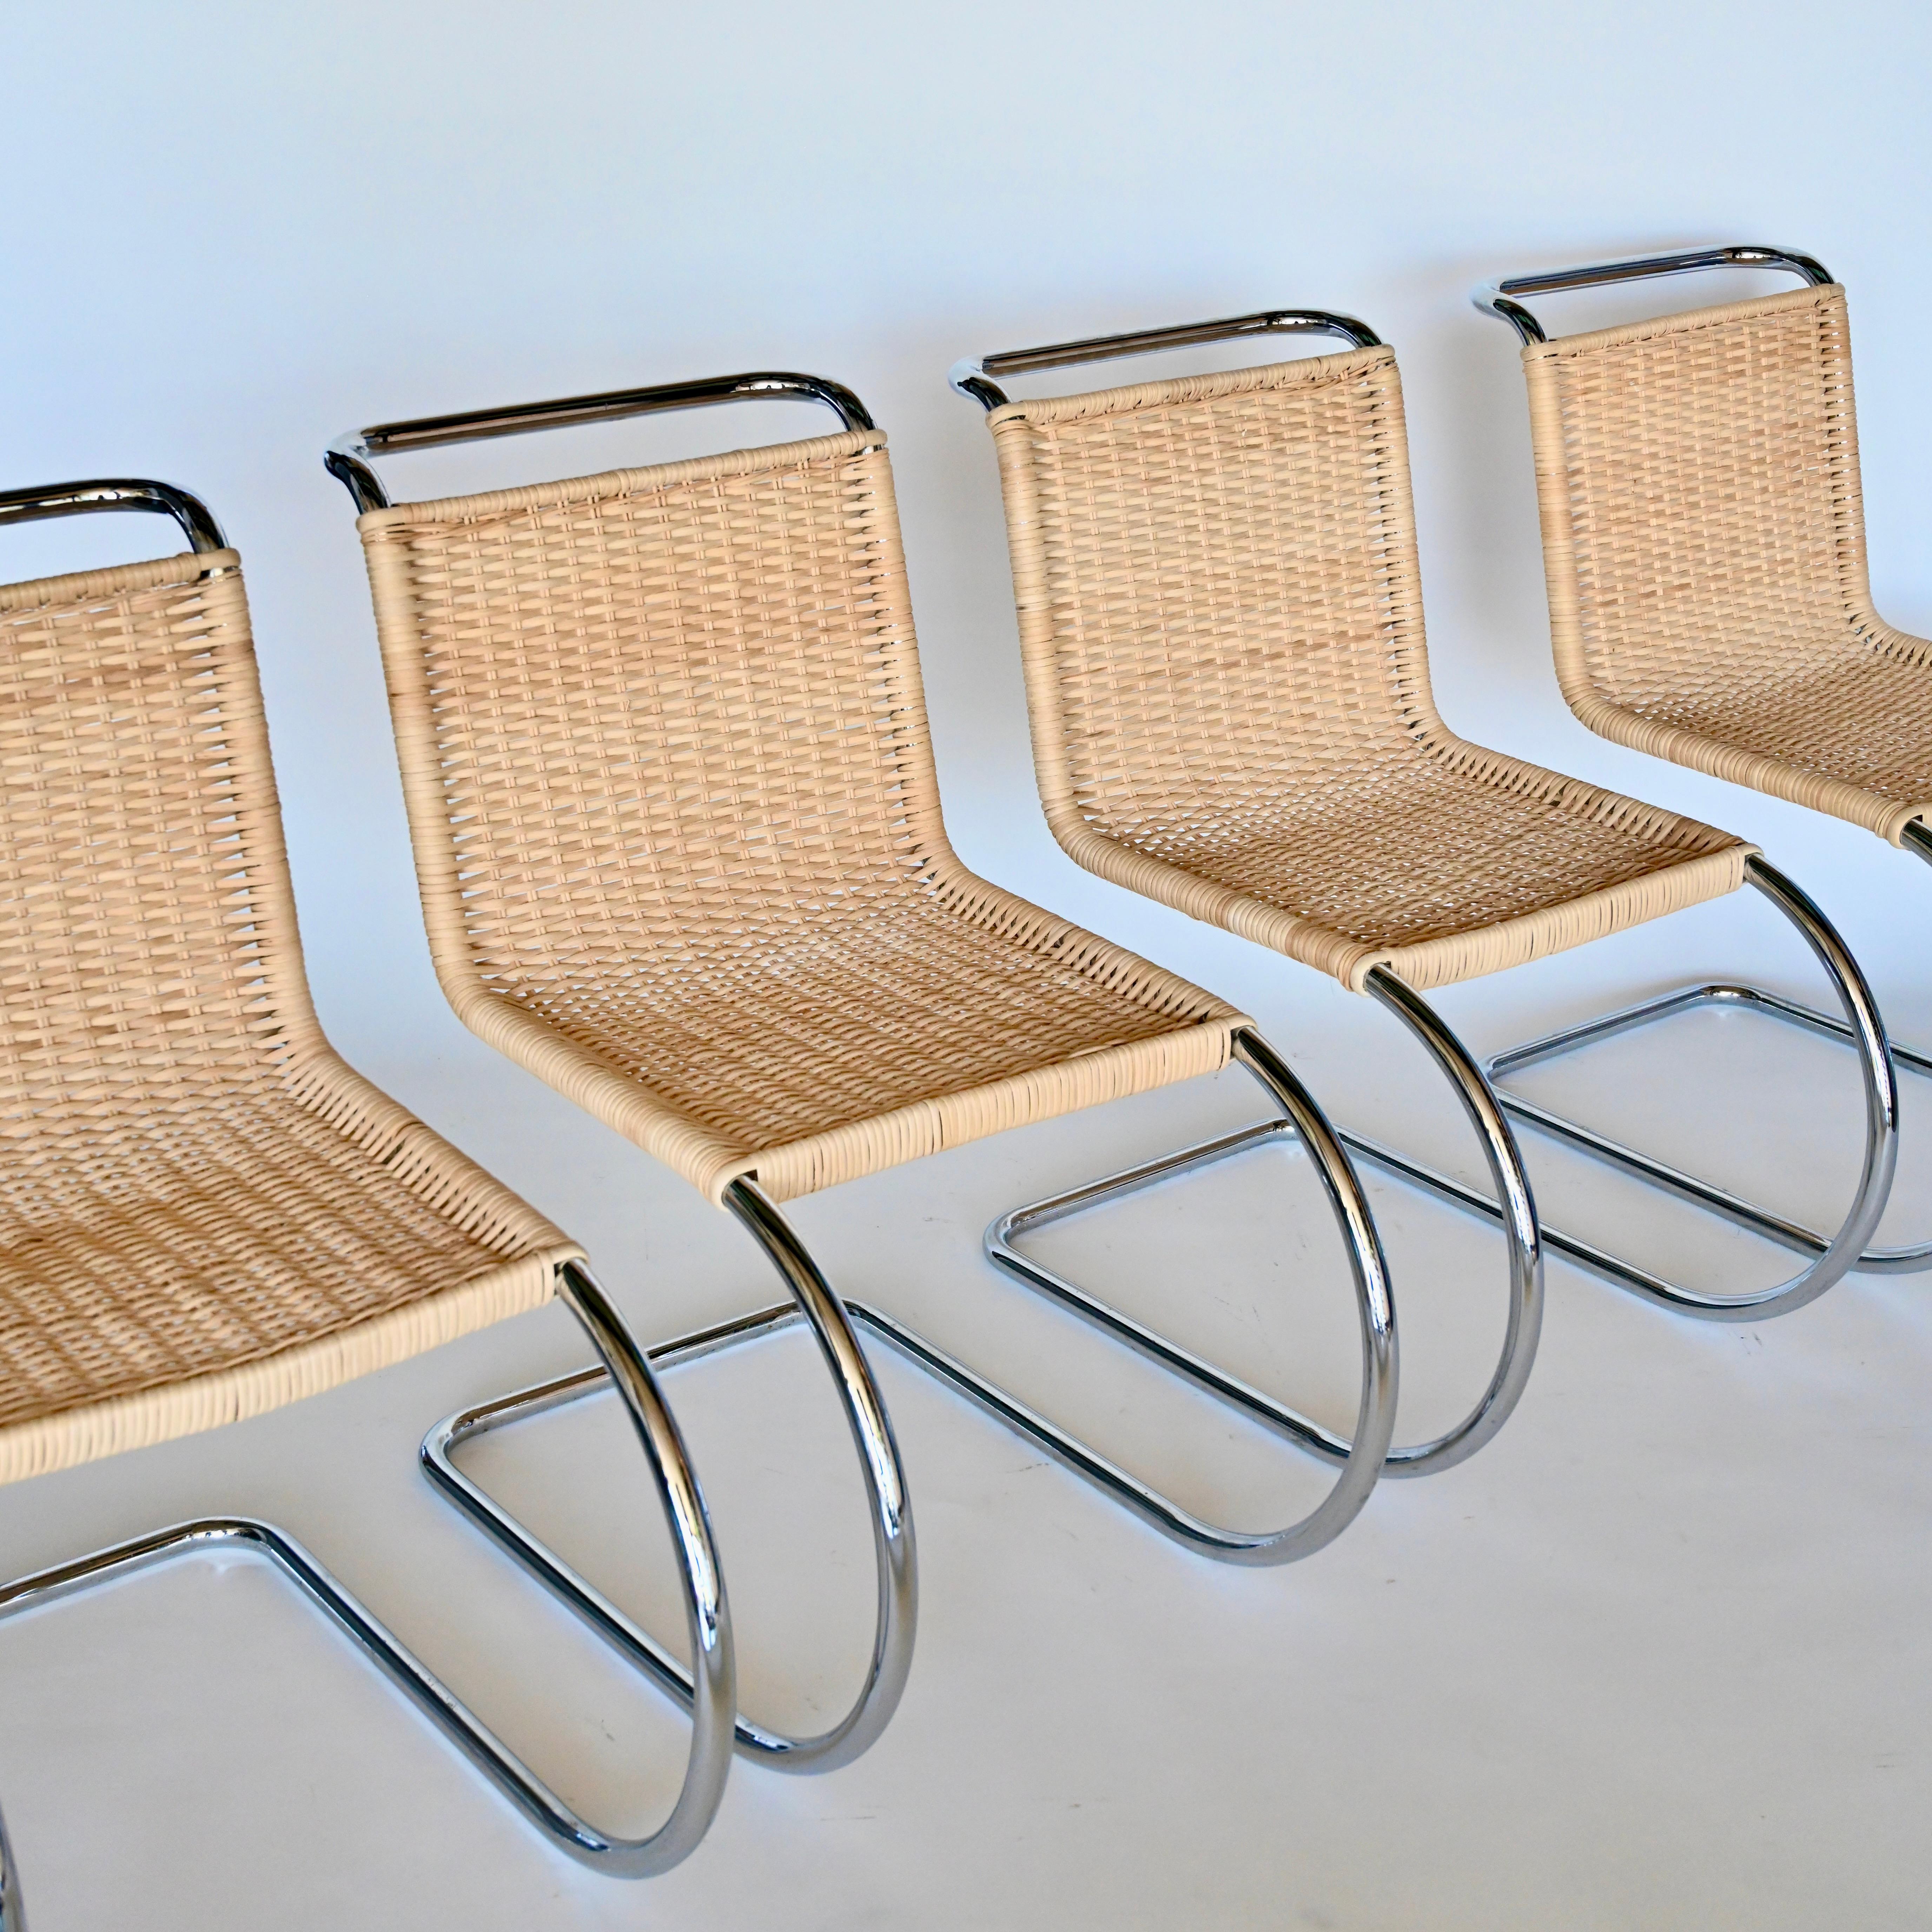 Set of four S 533 (also know as MR10) Cantilever chairs by Ludwig Mies Van Der Rohe. Chrome and rattan. Rattan has been recently redone and is in excellent condition. 